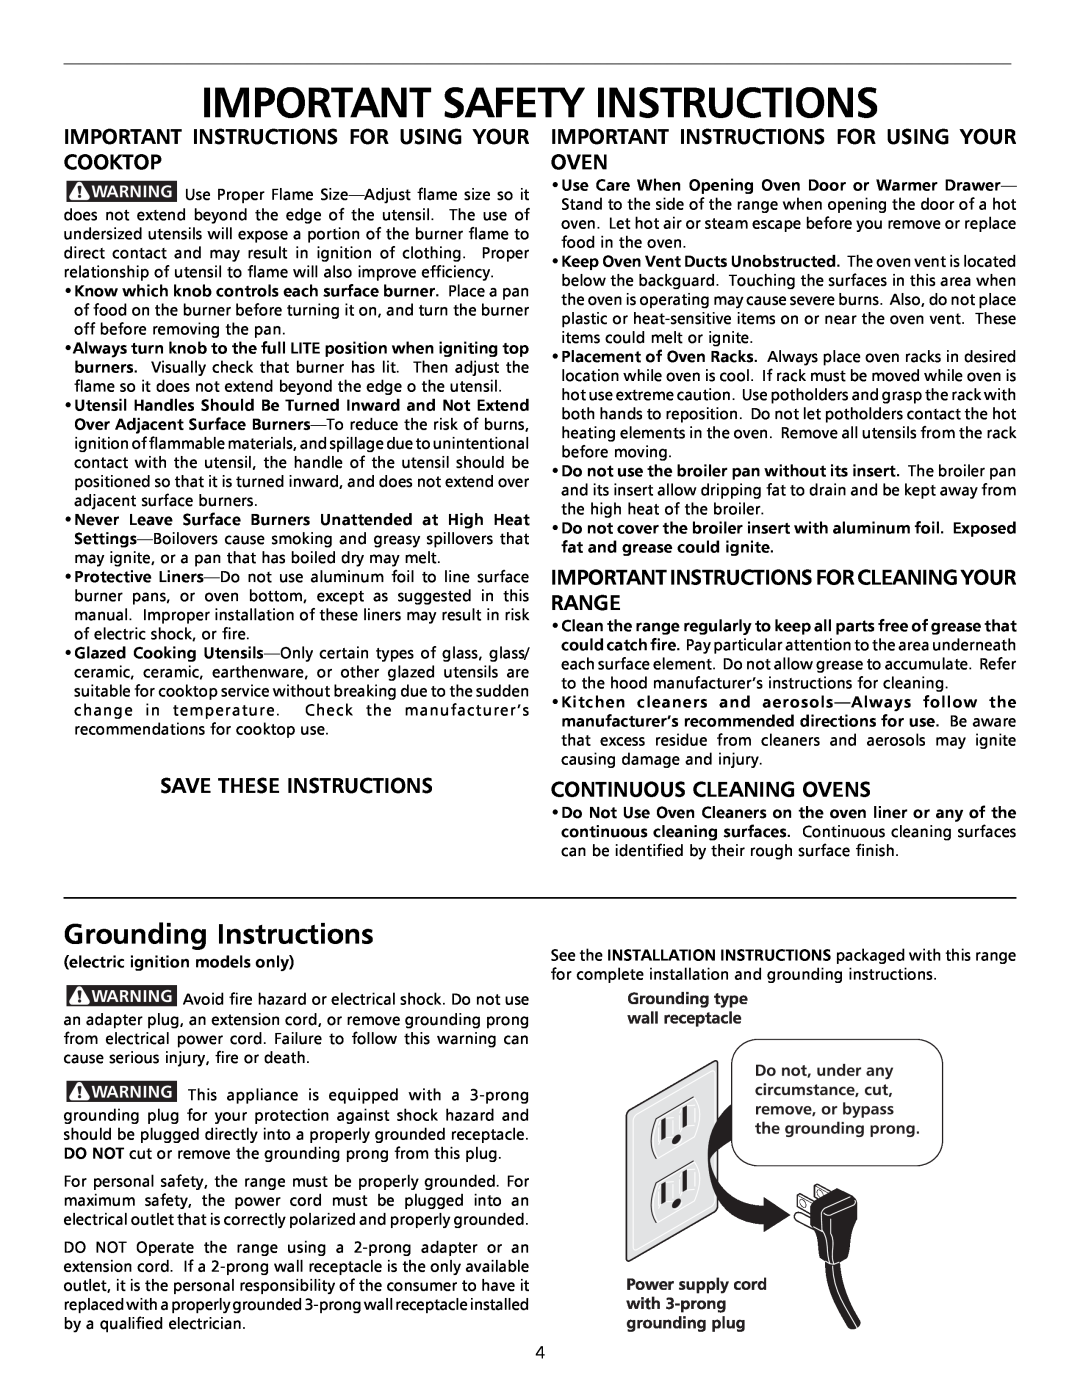 Tappan 316000181 Grounding Instructions, Important Instructions For Using Your Cooktop, Save These Instructions 